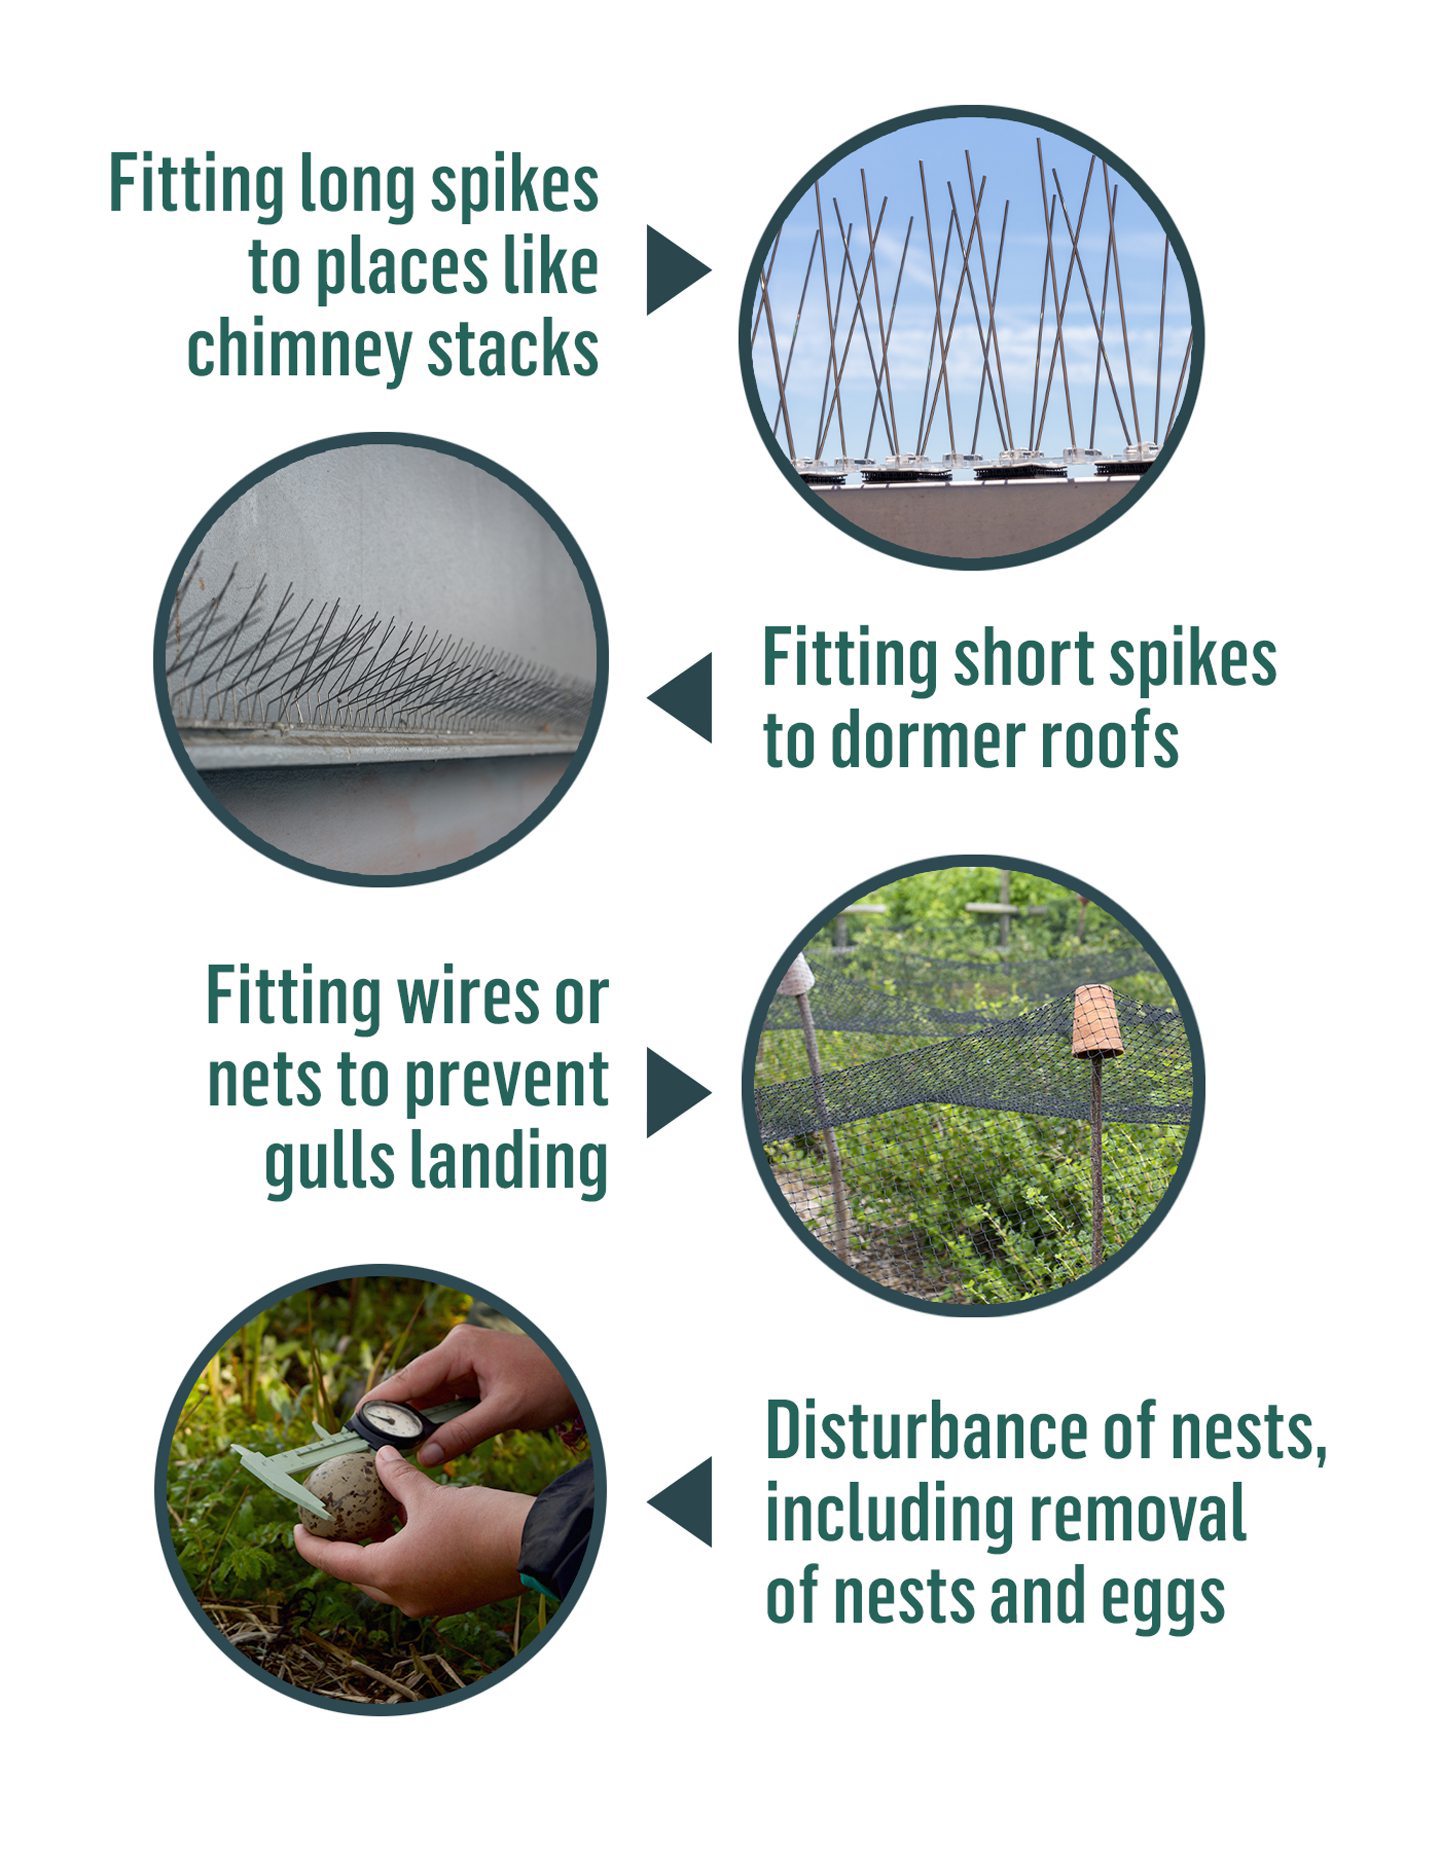 An infographic showing deterrent methods to stop seagulls nesting on your property such as fitting long spikes to chimney stacks. 